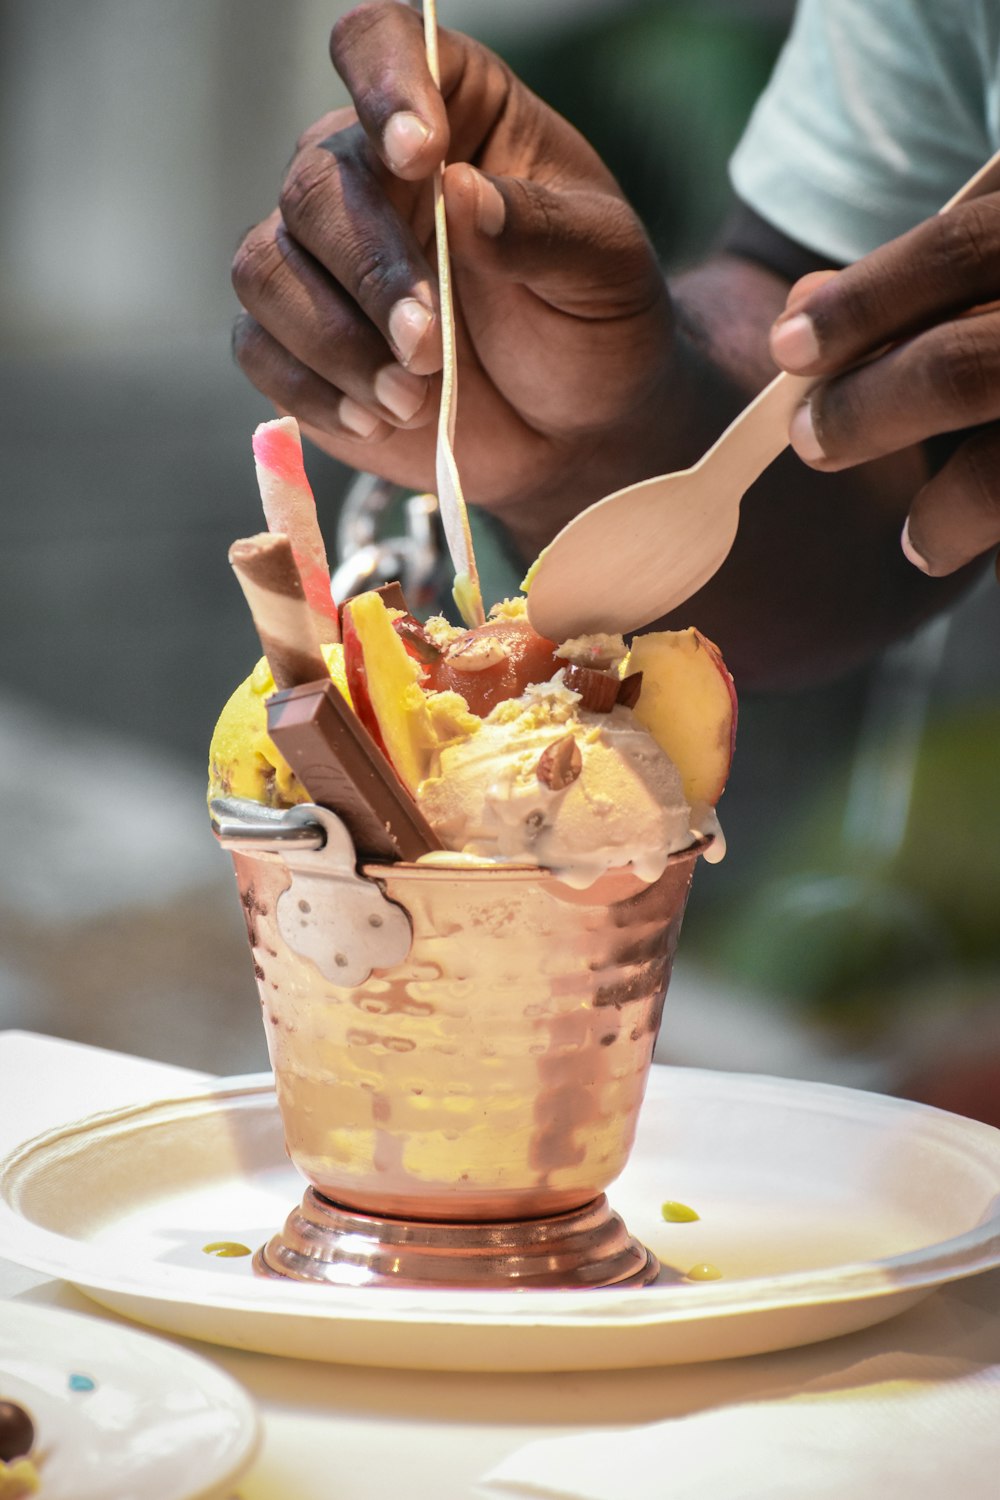 a person cutting into a dessert in a cup